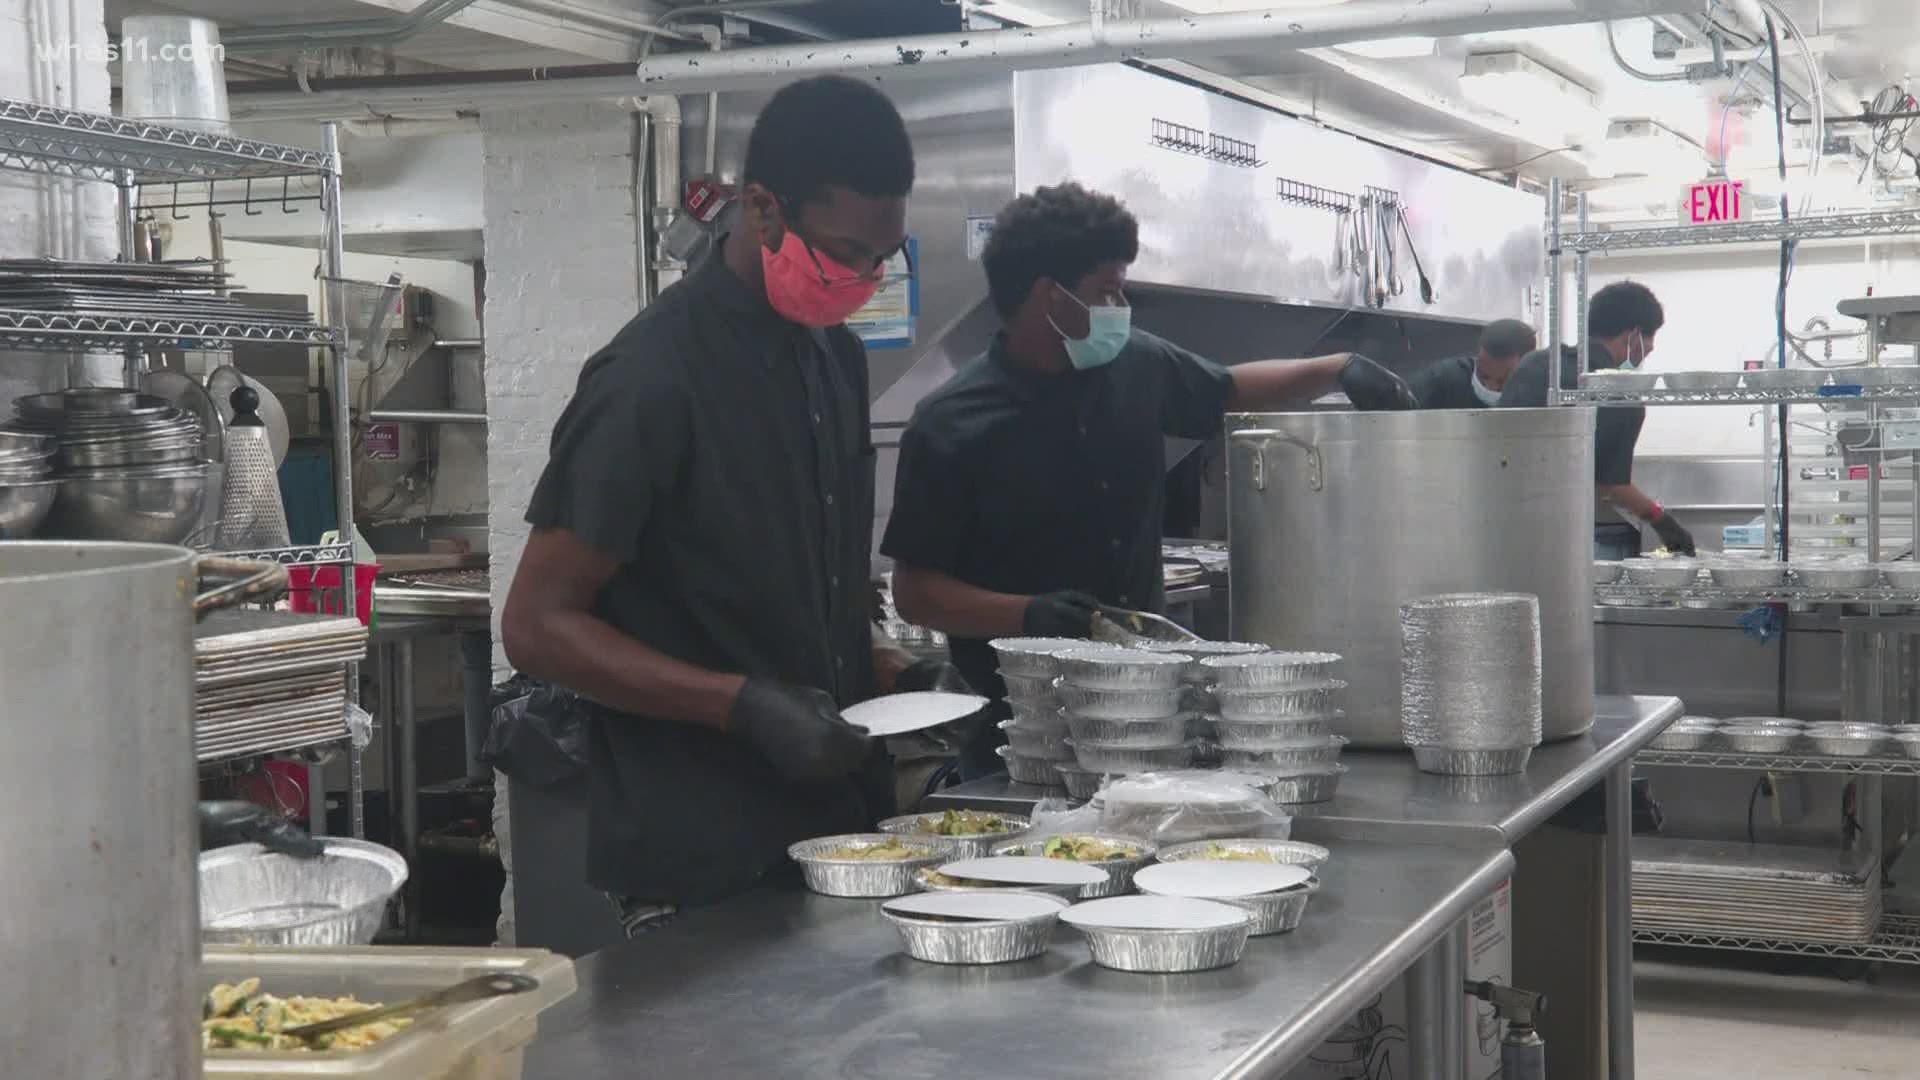 A community kitchen has opened its doors today in honor of a man who loved to cook and feed those in need.